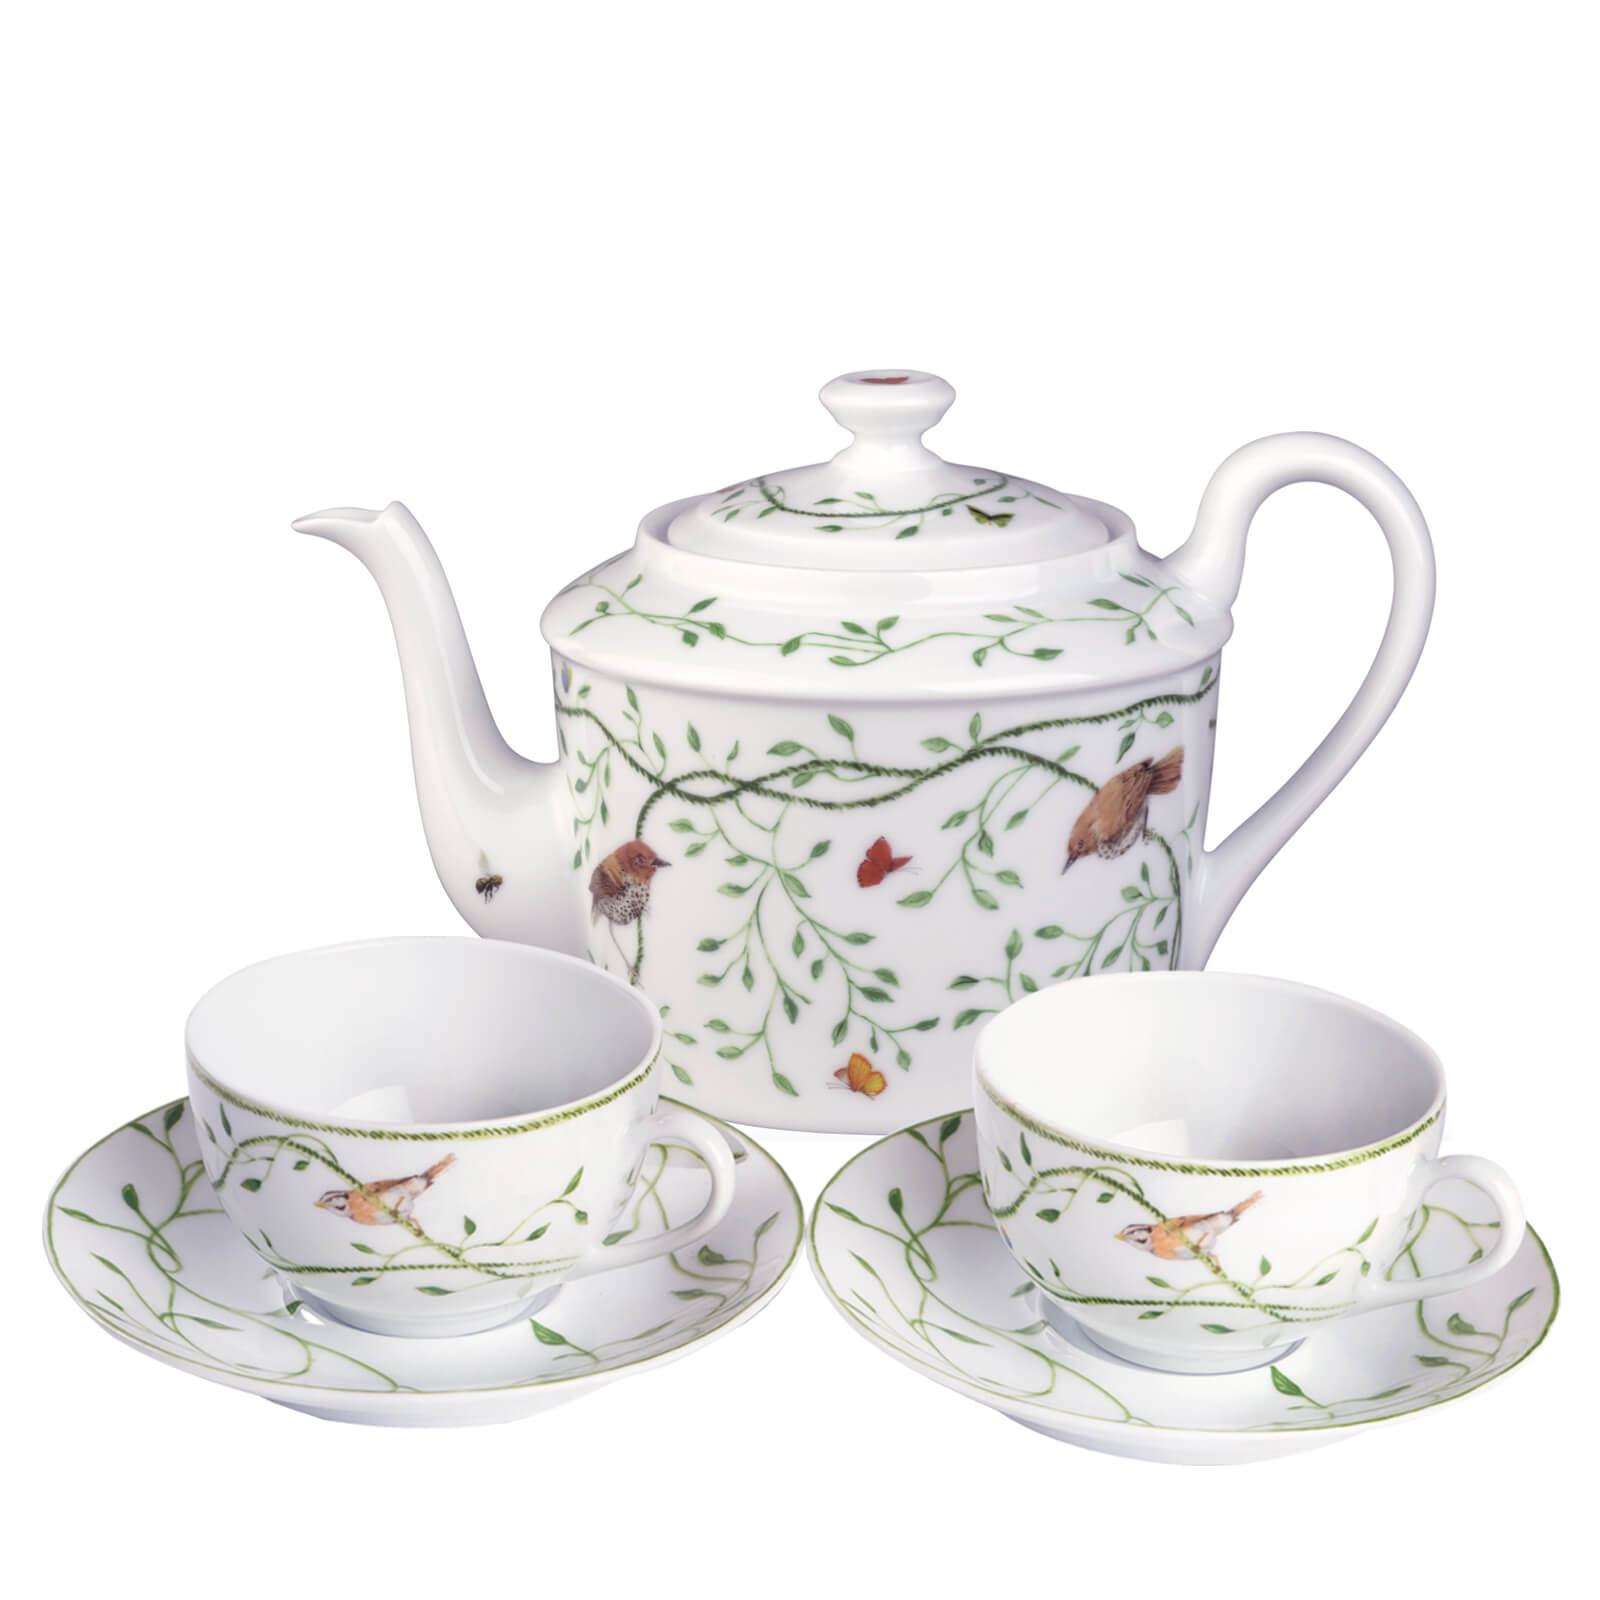 Le Bristol Paris Raynaud Set of Two Tea Cups, Saucers, Teapot, Sugar Bowl & Creamer - Oetker Collection Hotels Boutique